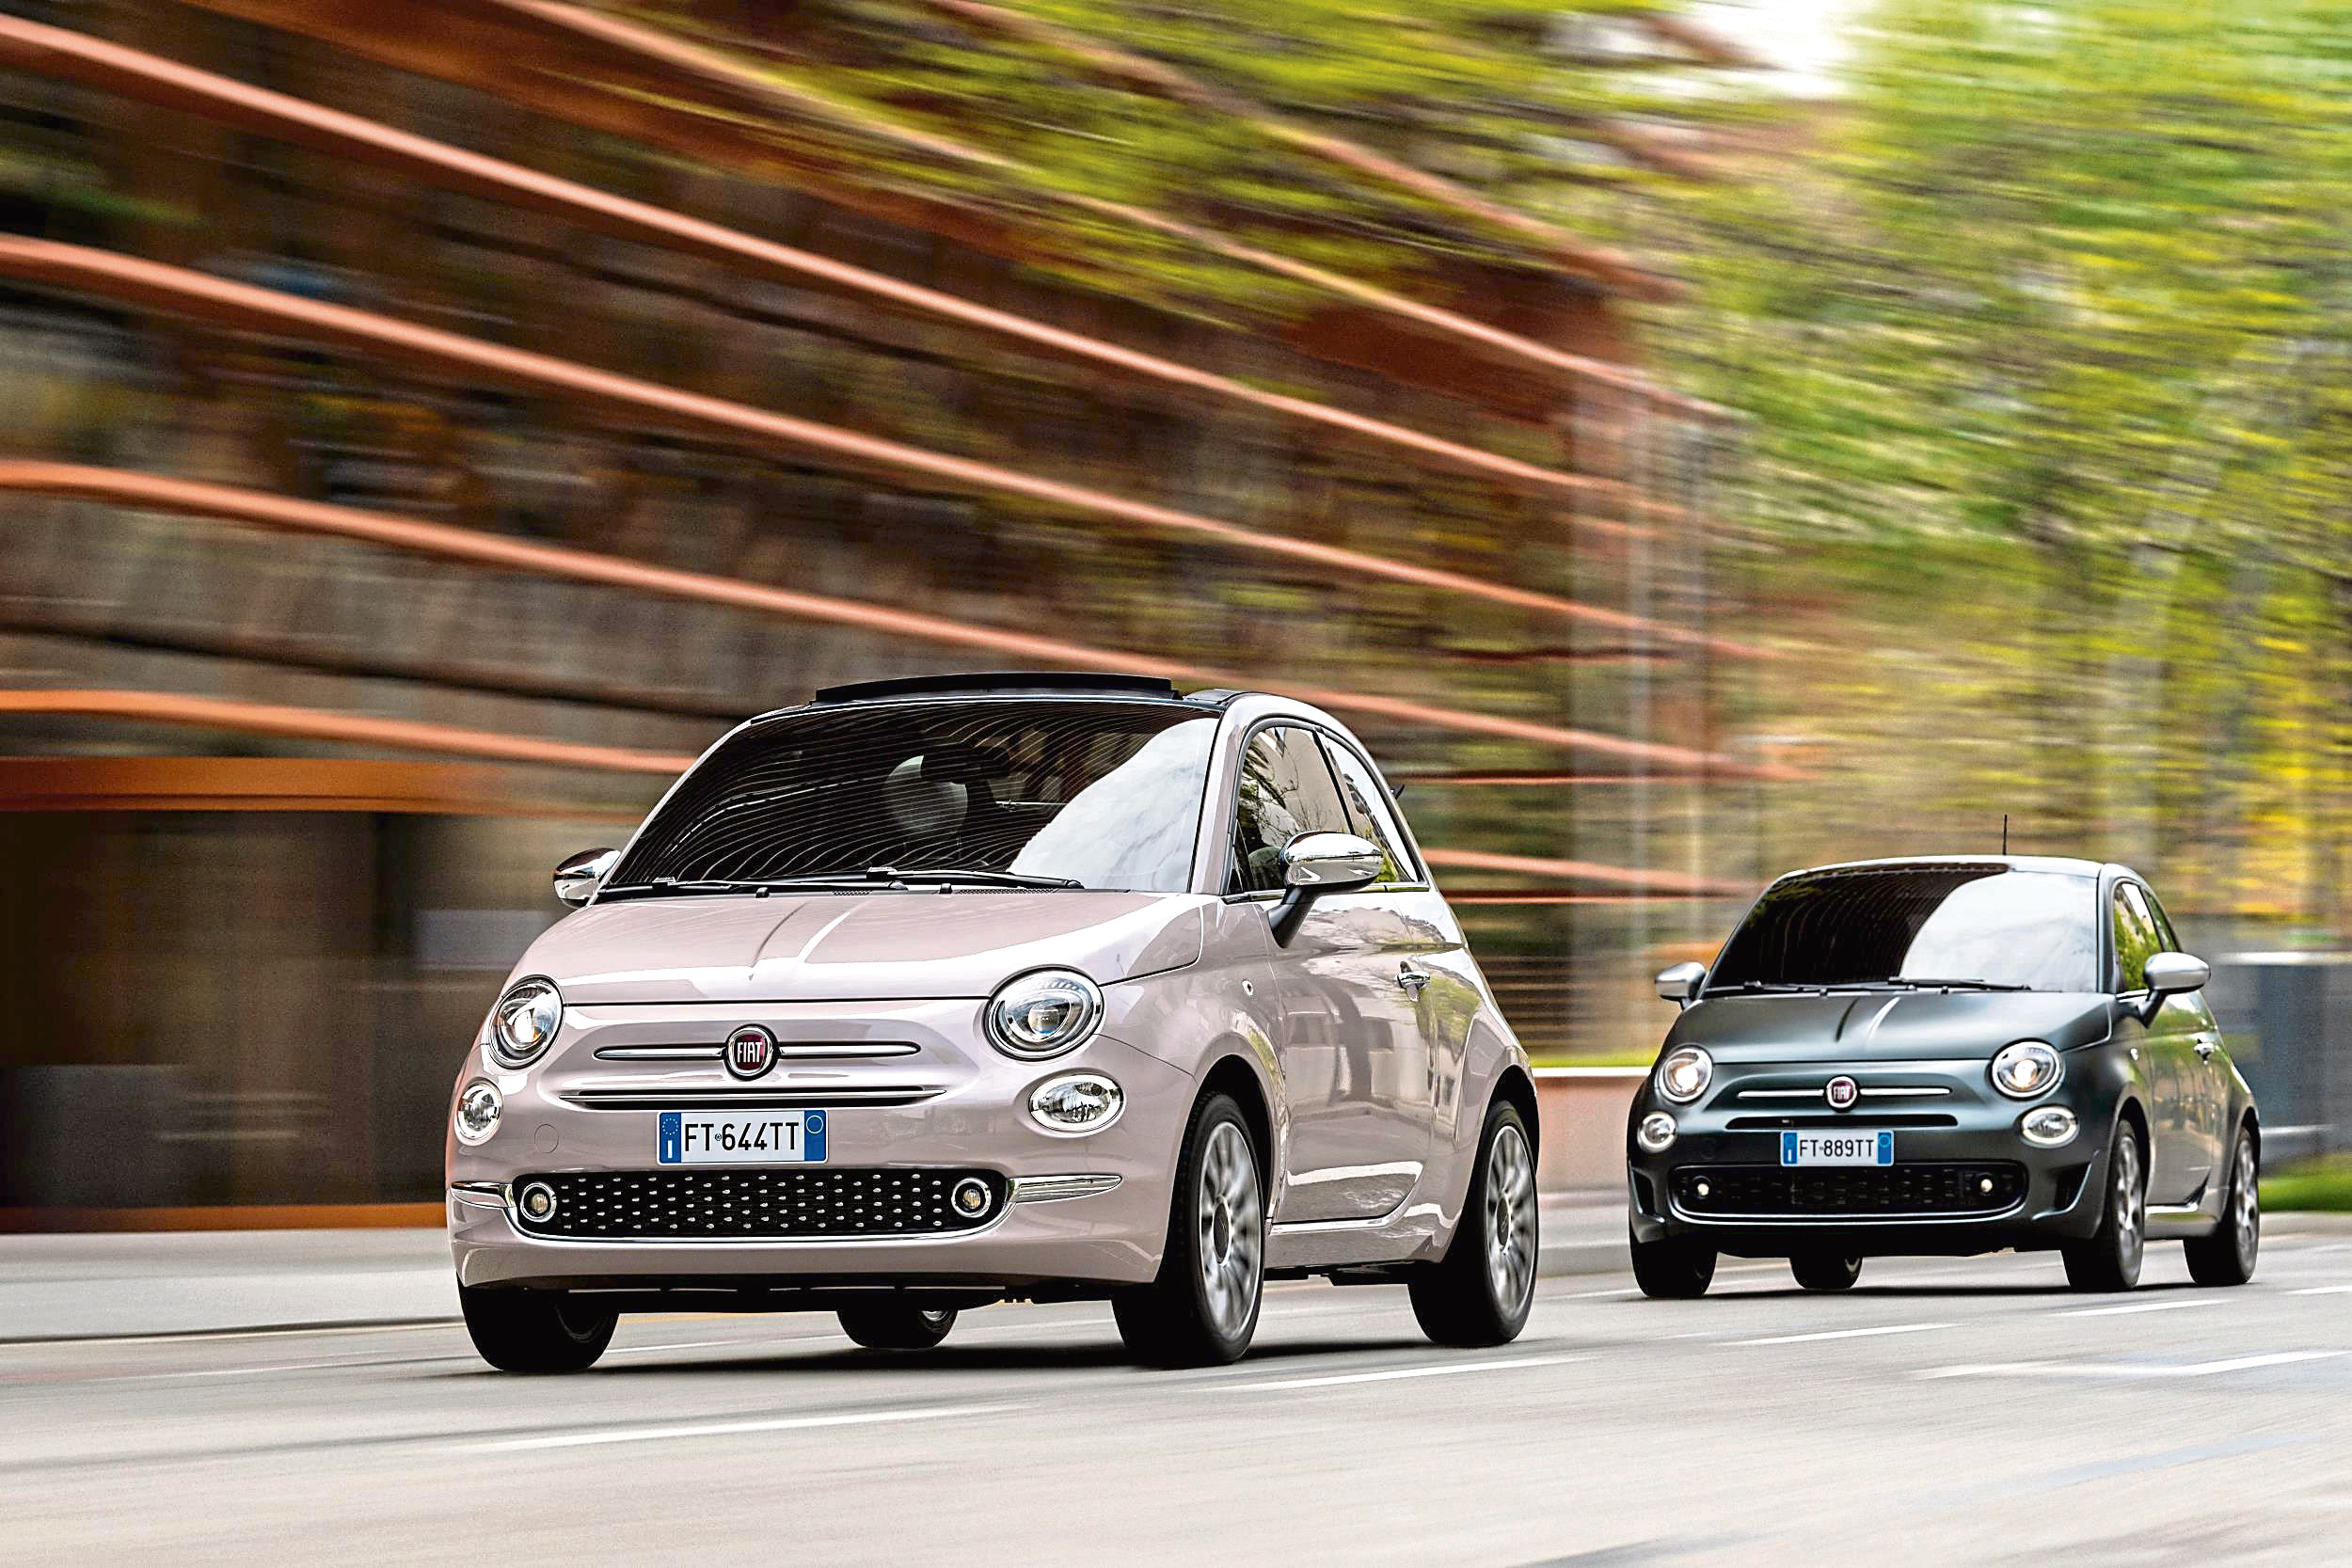 Fiat adds Star and Rockstar trims to 500 line-up